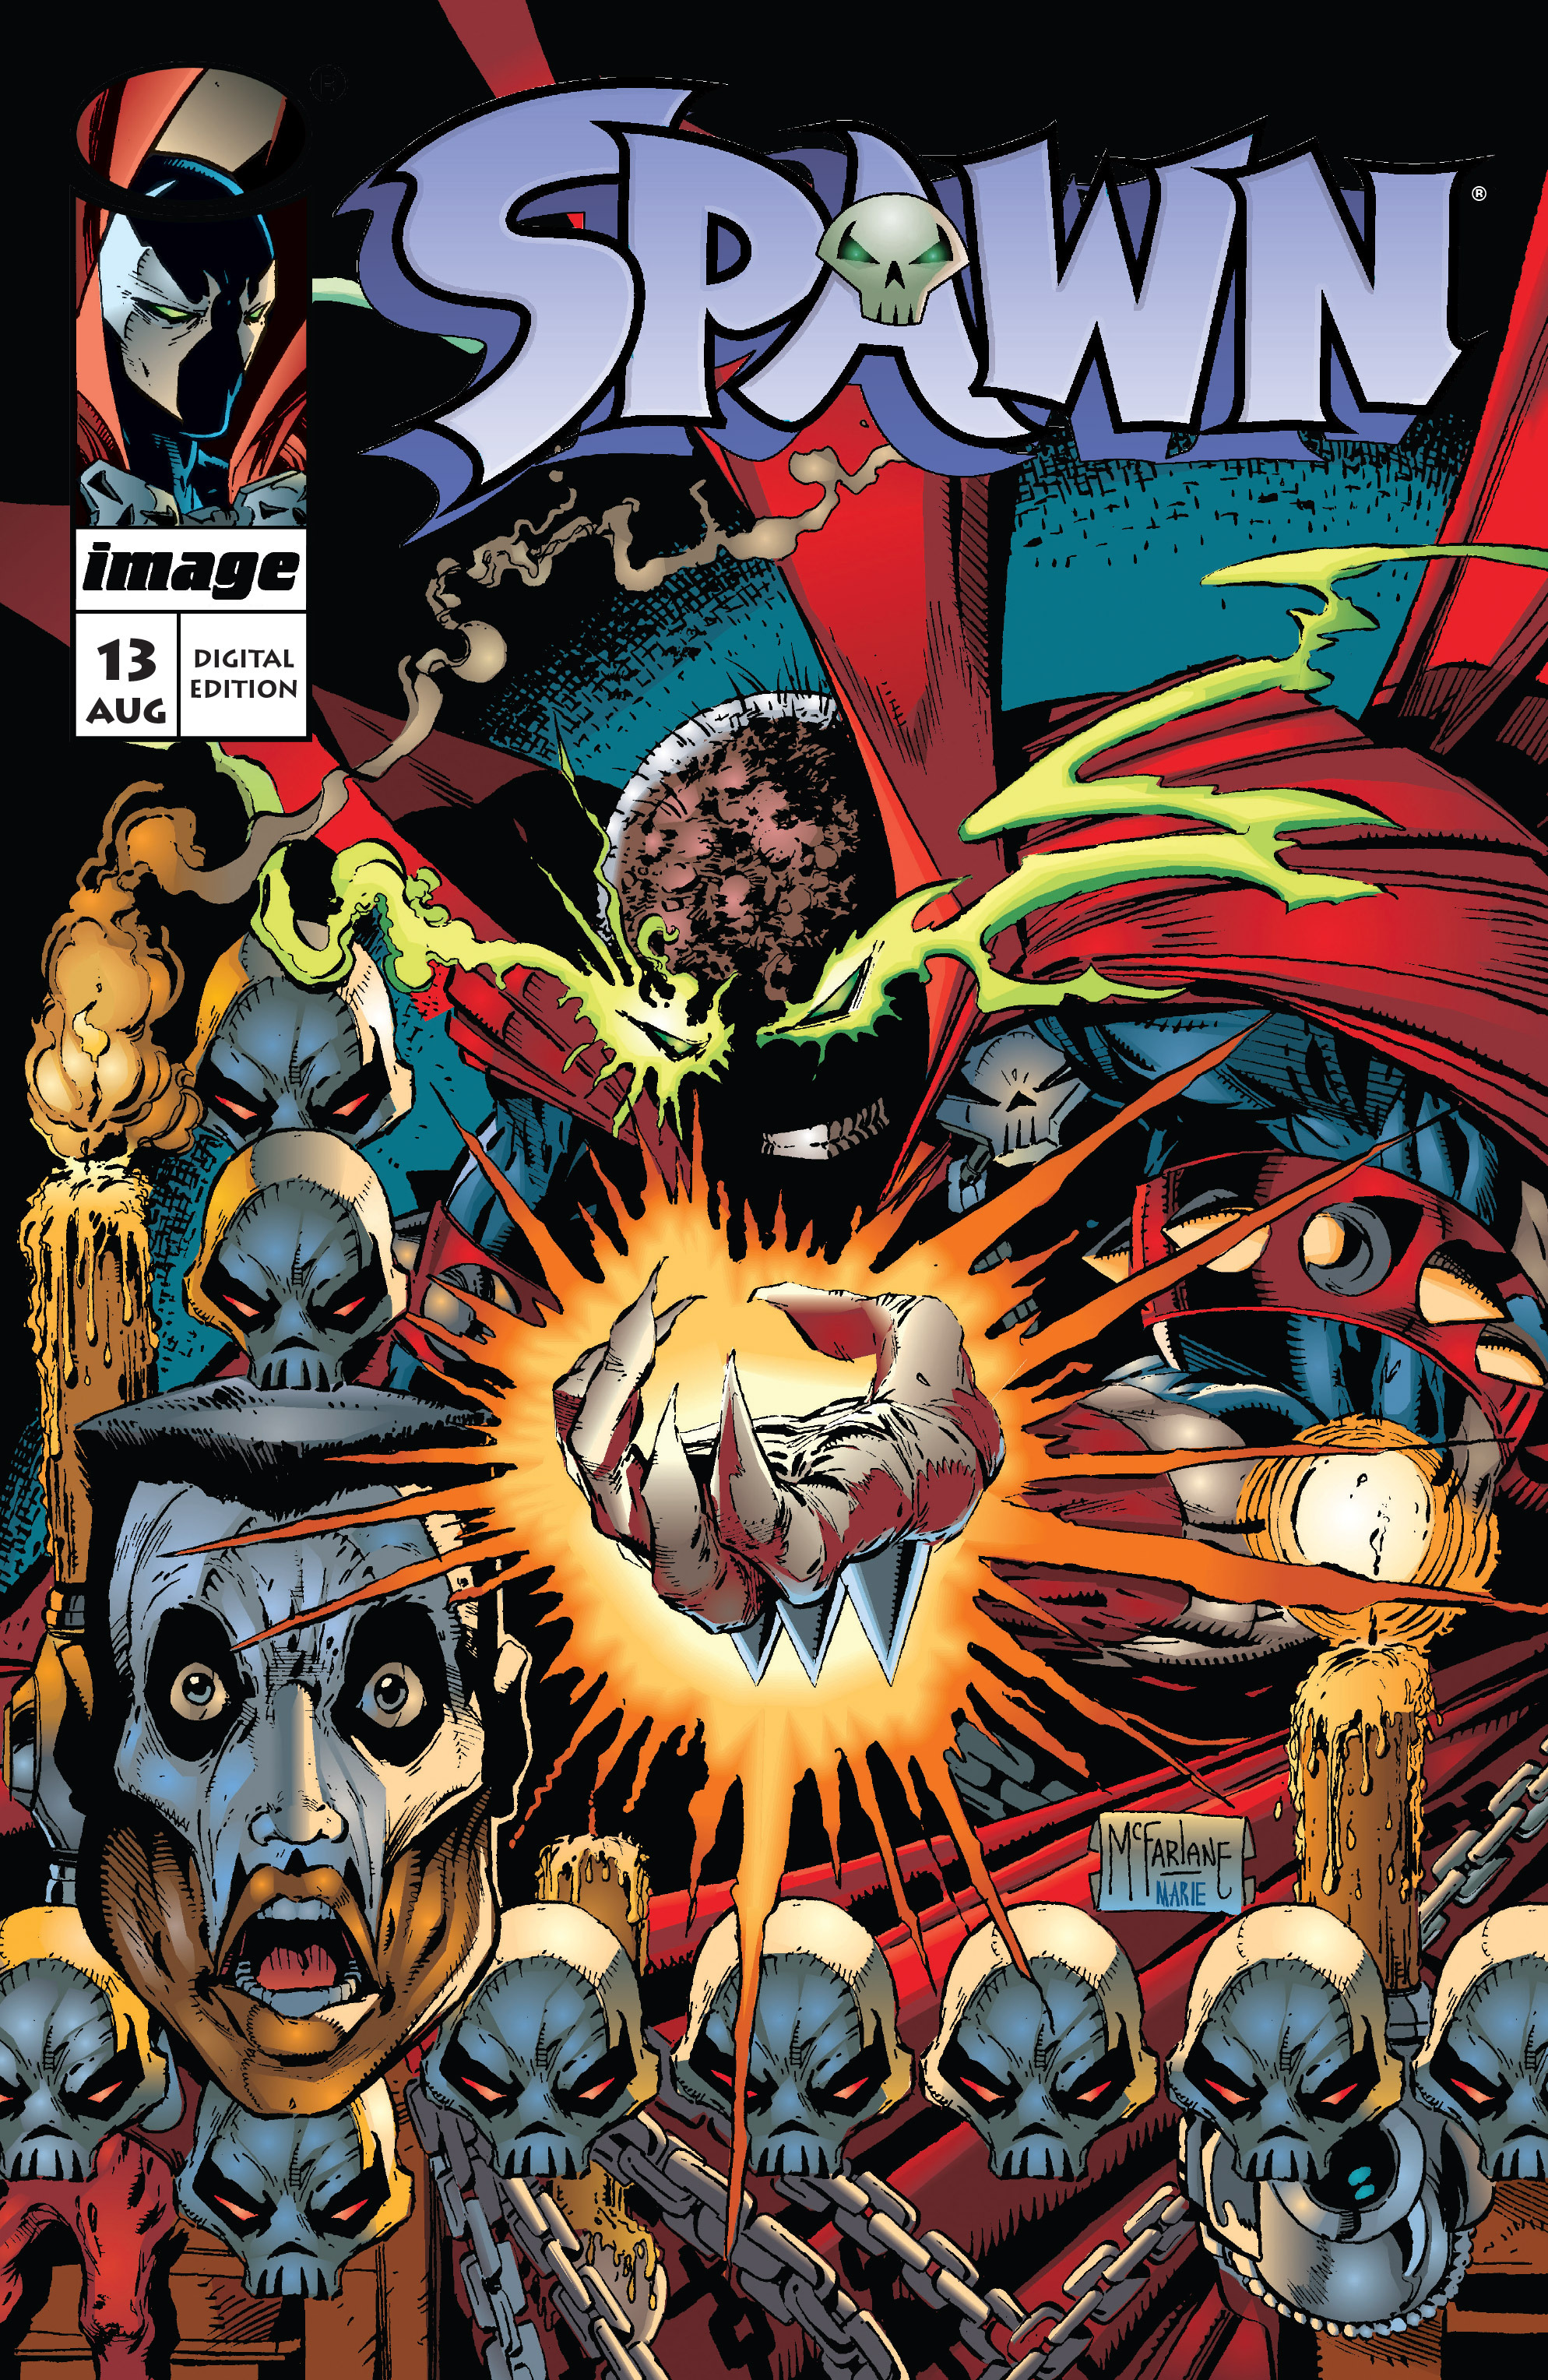 Read online Spawn comic -  Issue #13 - 1